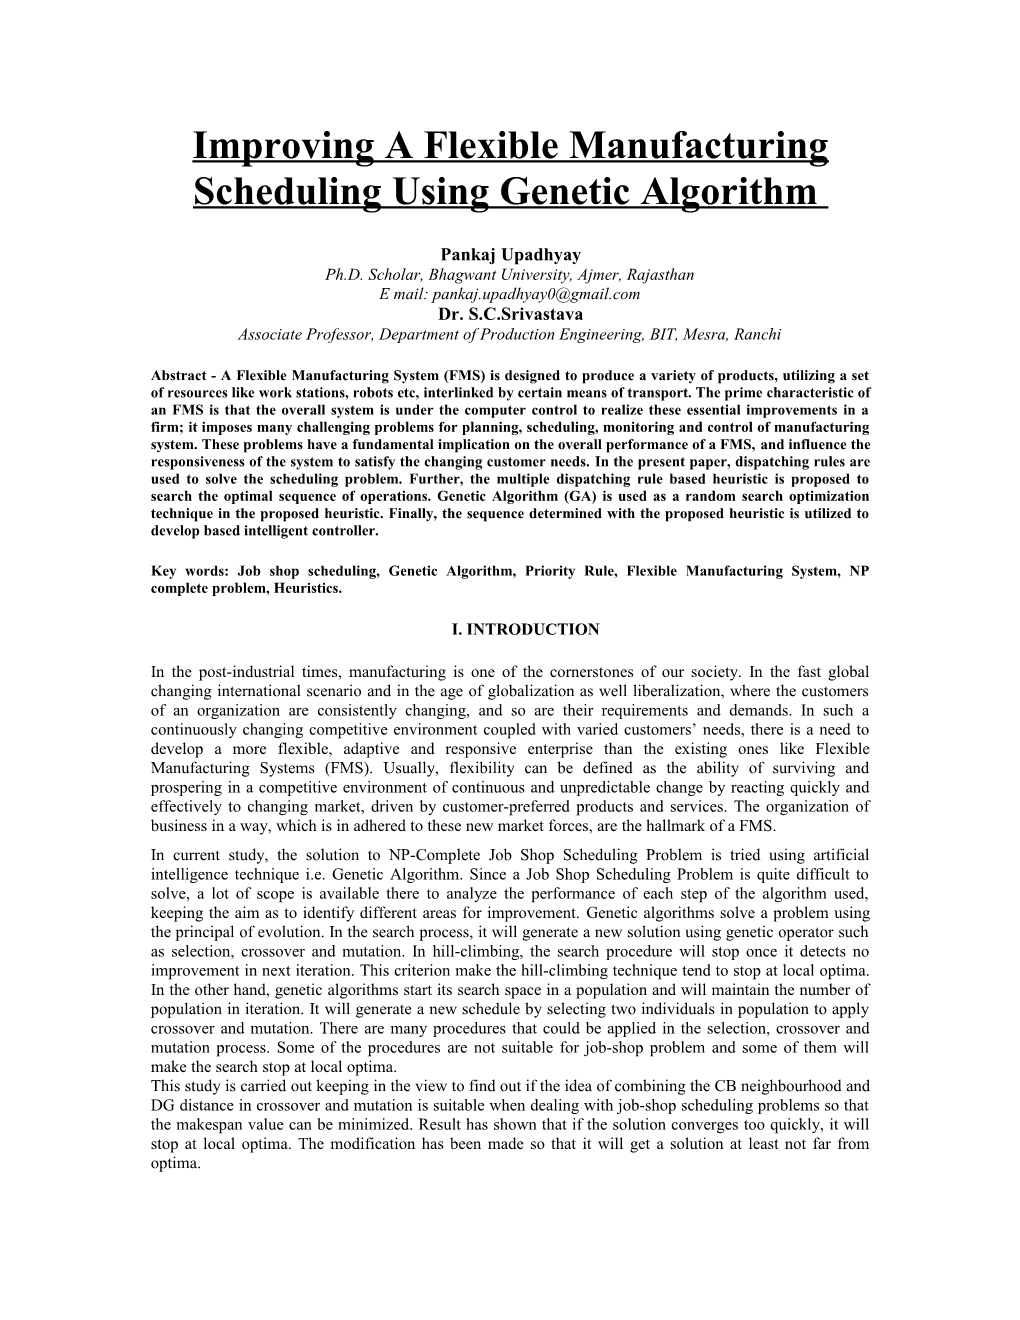 Improving a Flexible Manufacturing Scheduling Using Genetic Algorithm